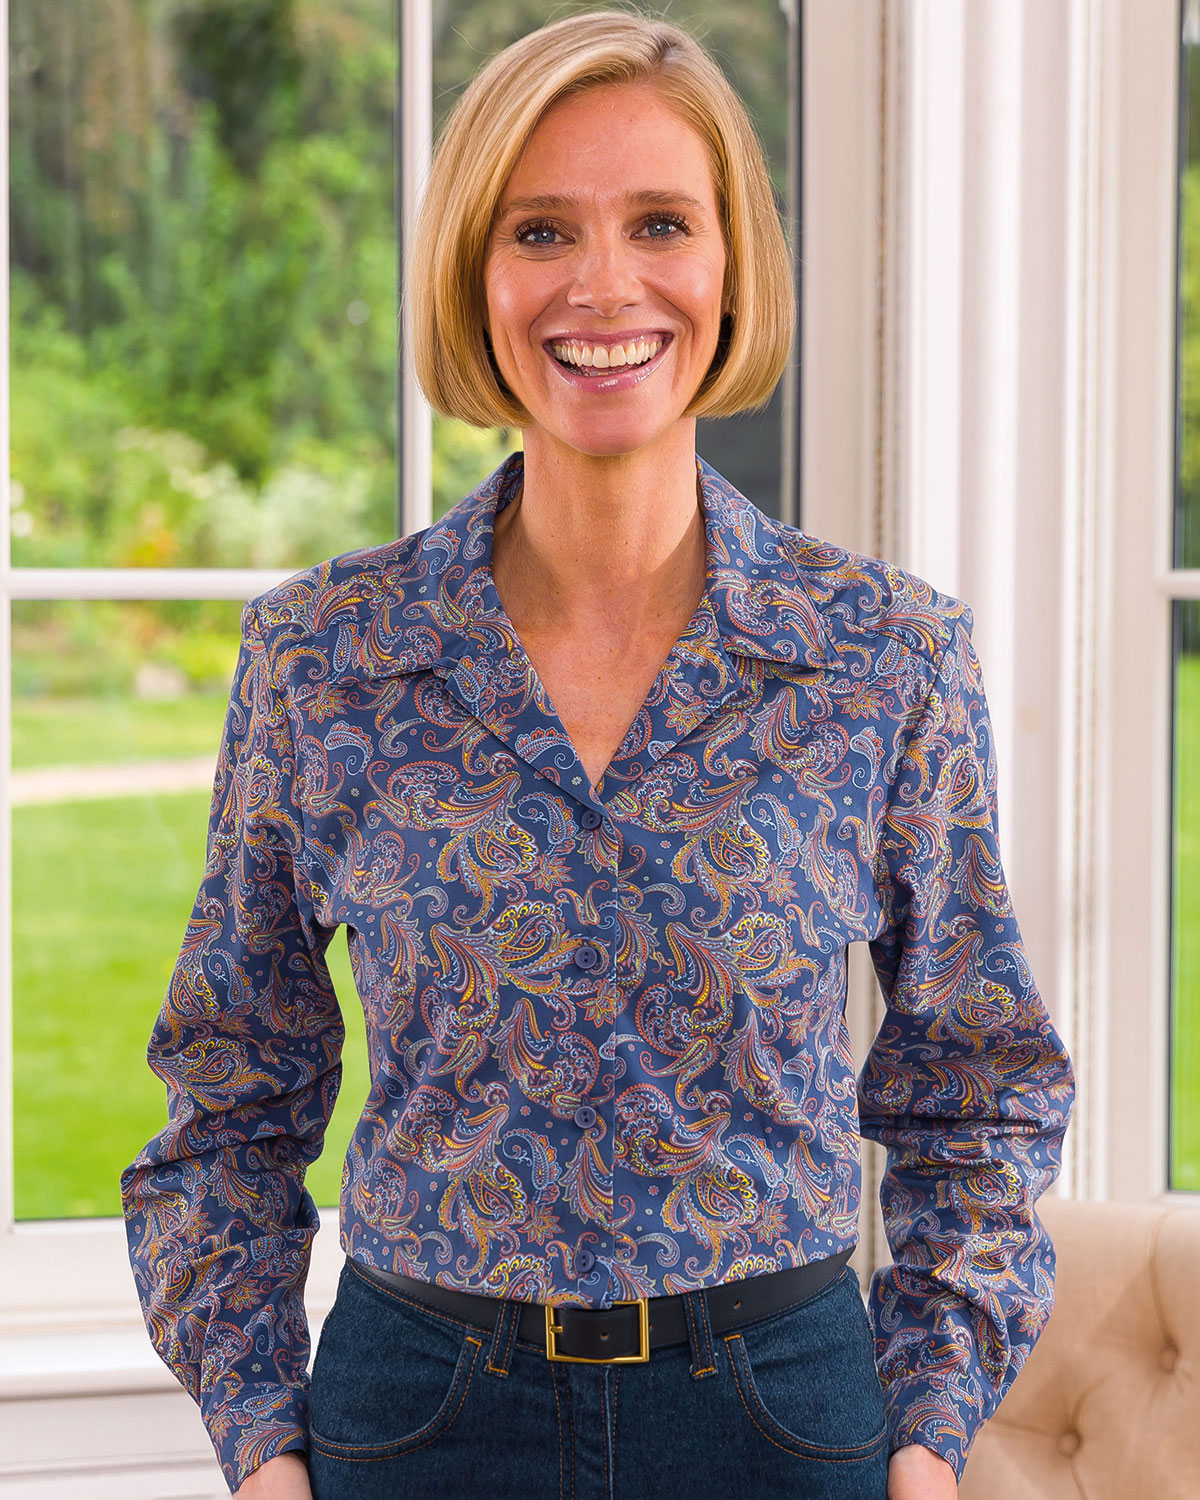 Paisley patterned blouse